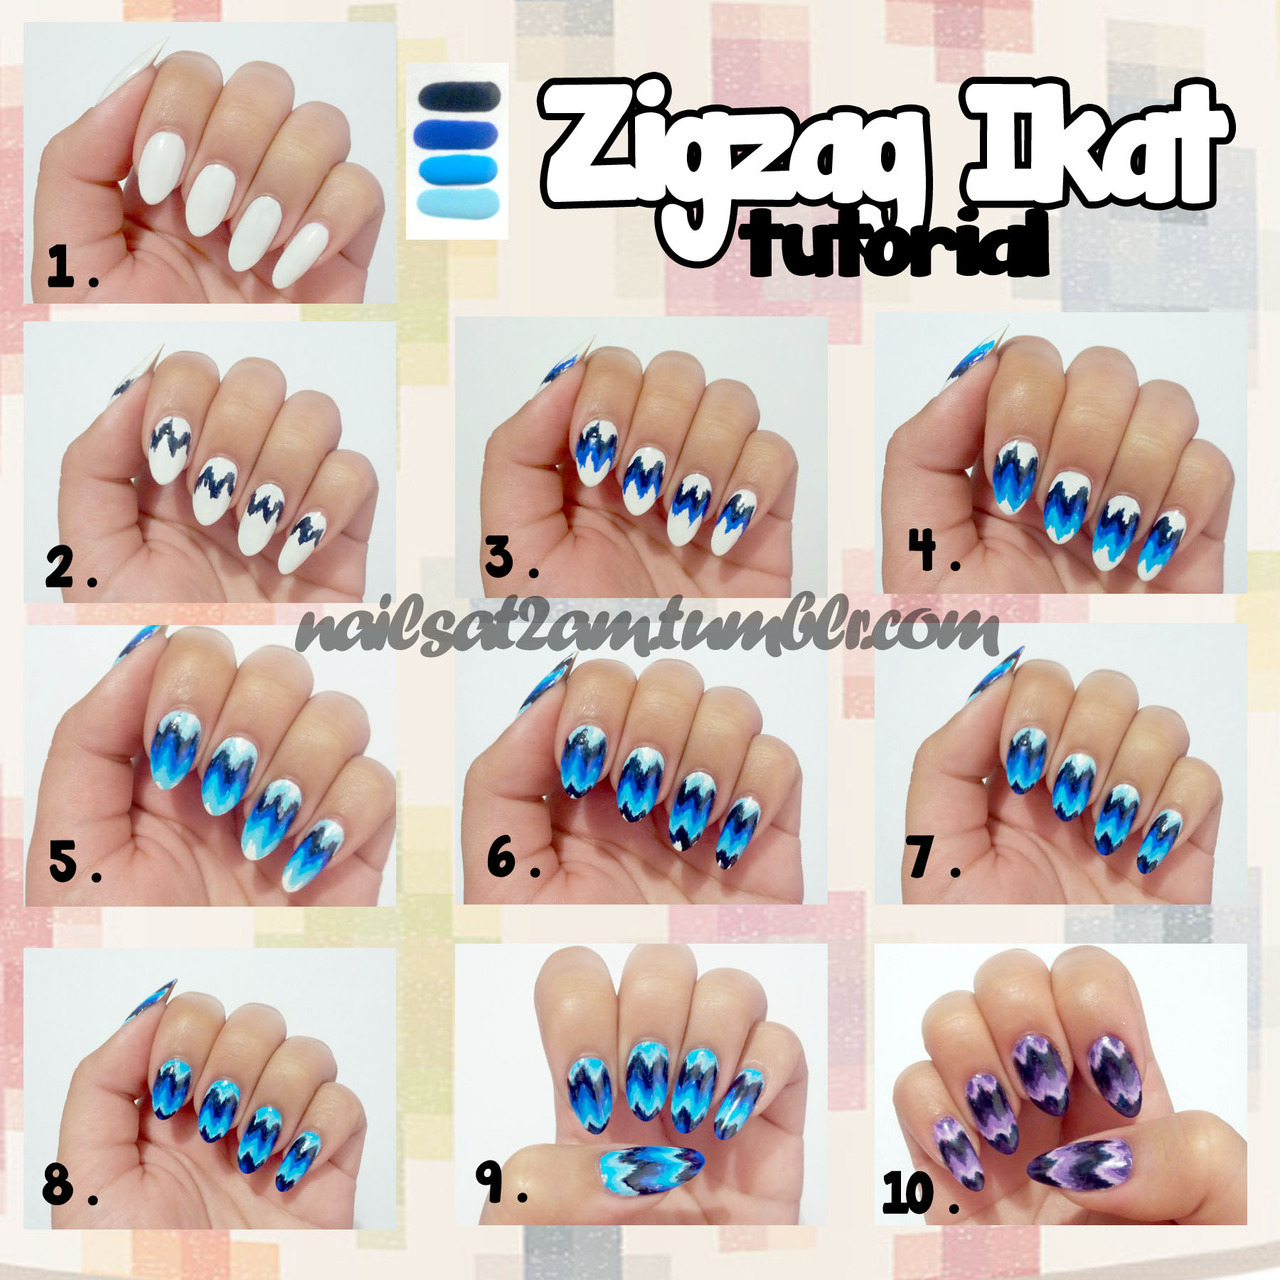 Zigzag Ikat Nail Tutorial
Have ready: 4 different shades of blue (or other) polish, a white polish, top coat and a striping brush/ thin paint brush. 
1. Paint your nails with two coats of white as a base.
2. With the darkest blue polish and your striping brush, paint tiny vertical strokes/ dashes, one next to the other, creating the starting zigzag pattern for the design.
3/4/5. With the remaining blue polish (in order from darkest to lightest), paint on the same tiny strokes/ dashes following the zigzag pattern created in step 1.
6/7/8. Continue to fill in the rest of your nail following the pattern. Don&#8217;t forget to clean up around the cuticles with acetone and a small brush (:
9. Finish with a top coat, et voilà: blue ombre zigzag ikat nails (that&#8217;s a mouthful, must think of a better name!)
10. Play around with the colours, switch them up, the possibilities are endless! If you don&#8217;t have the different shades of a colour, just mix your own with the polish that you do have. Also, you don&#8217;t have to only use 4 shades, go crazy and use 10!    tag me #nailsat2am I&#8217;d love to see! ;D
nailsat2am.tumblr.com || Instagram: xtinemayyy